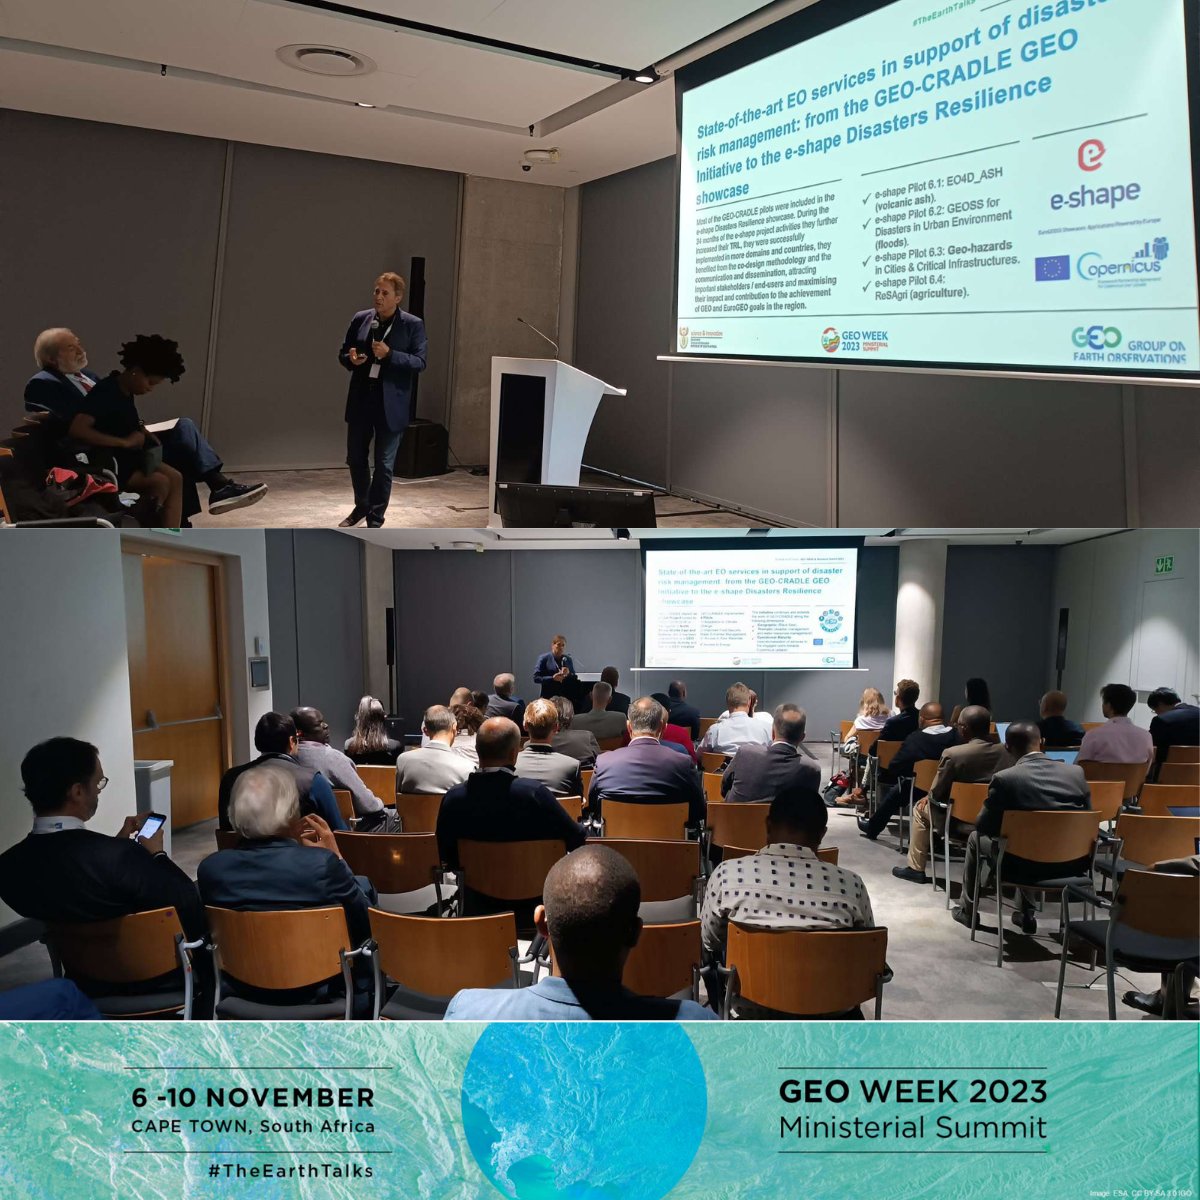 📢#BEYONDNews_Alert 🔔 @beyond_center at the #GEOWeek2023 with @kontoes1, our Director and @AlexiaTsouni our Research Associate, showcasing the successful implementation of innovative applications in the real daily practice of the engaged users. @GEOSEC2025 #TheEarthTalks